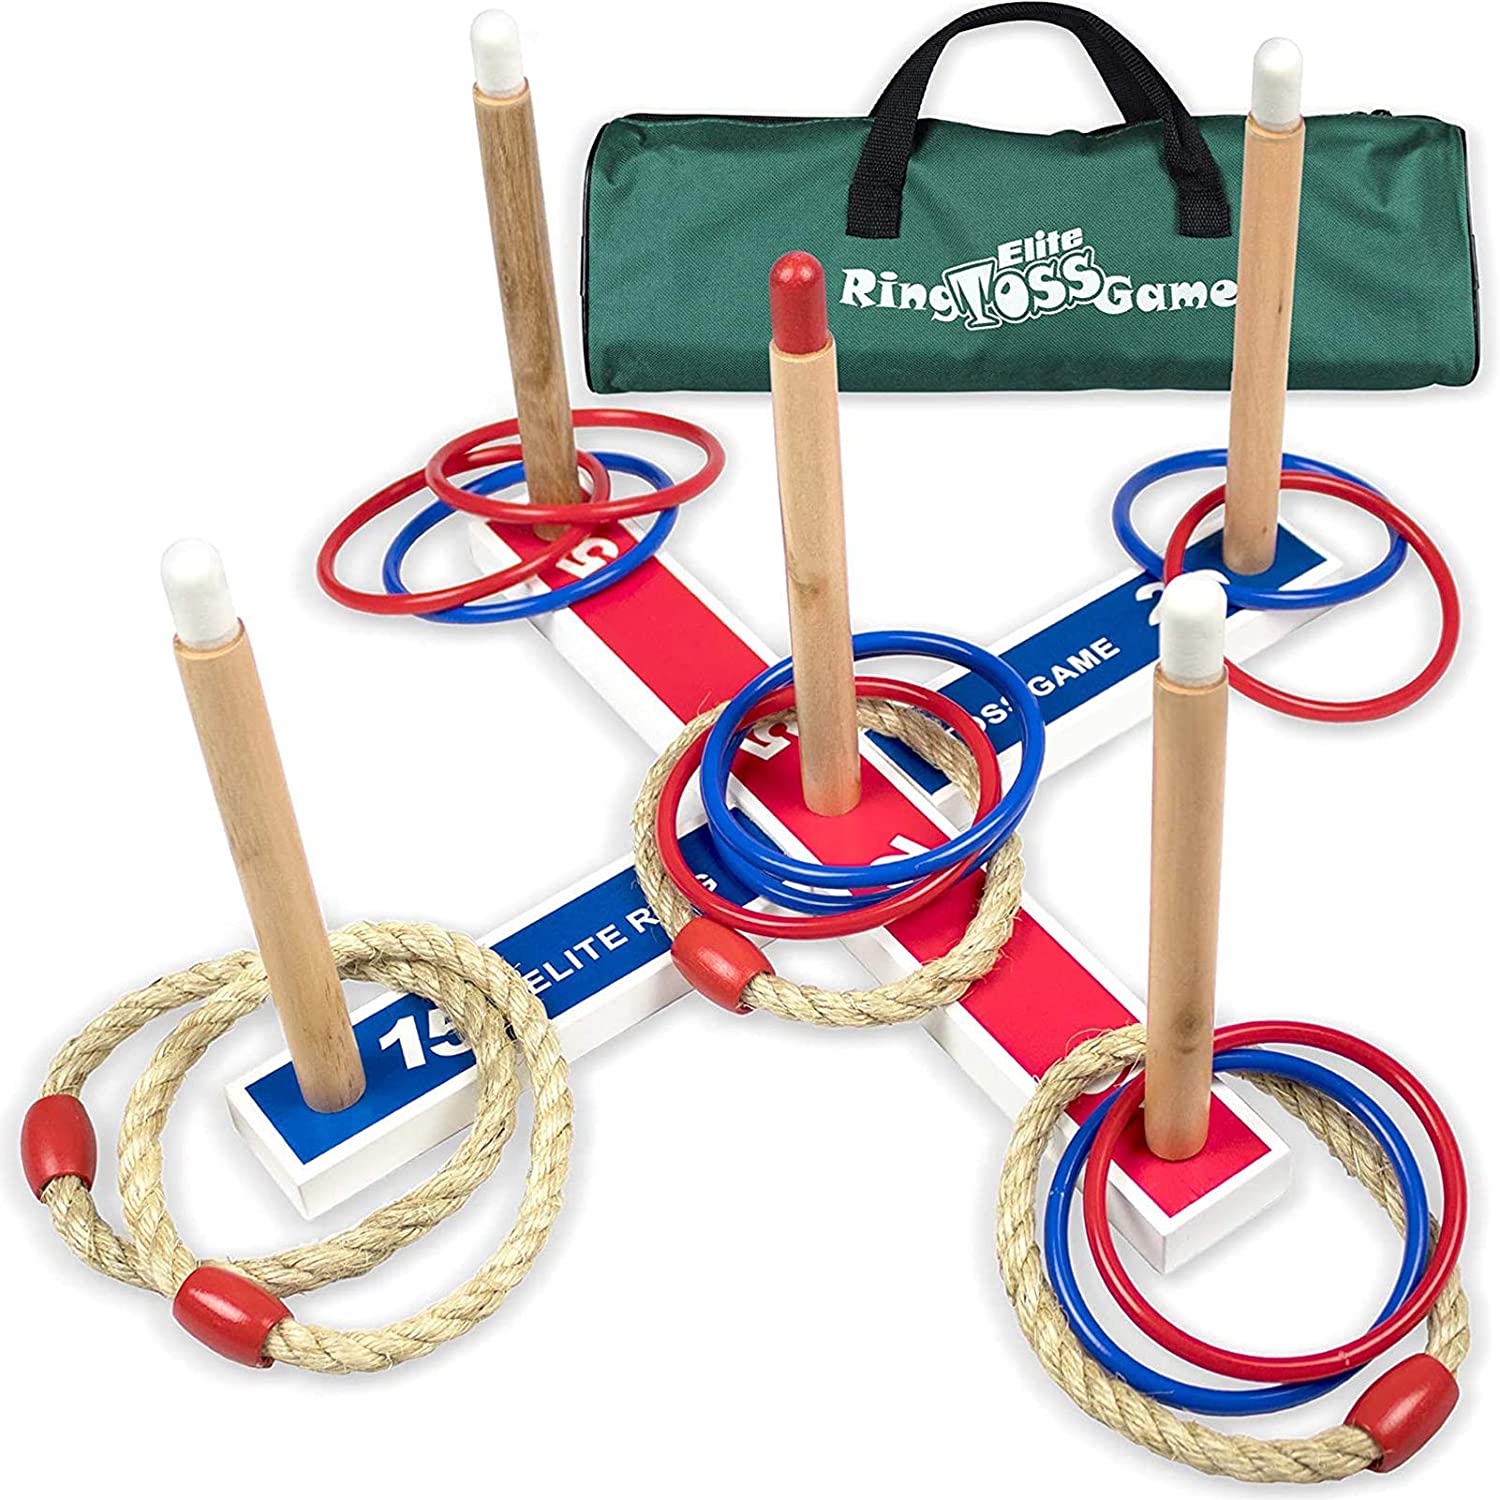 Indoor Holiday Fun or Outdoor Yard Game for Adults & Family - Easy to Set Up with Compact Carry - Backyard Toys & Easter Gifts